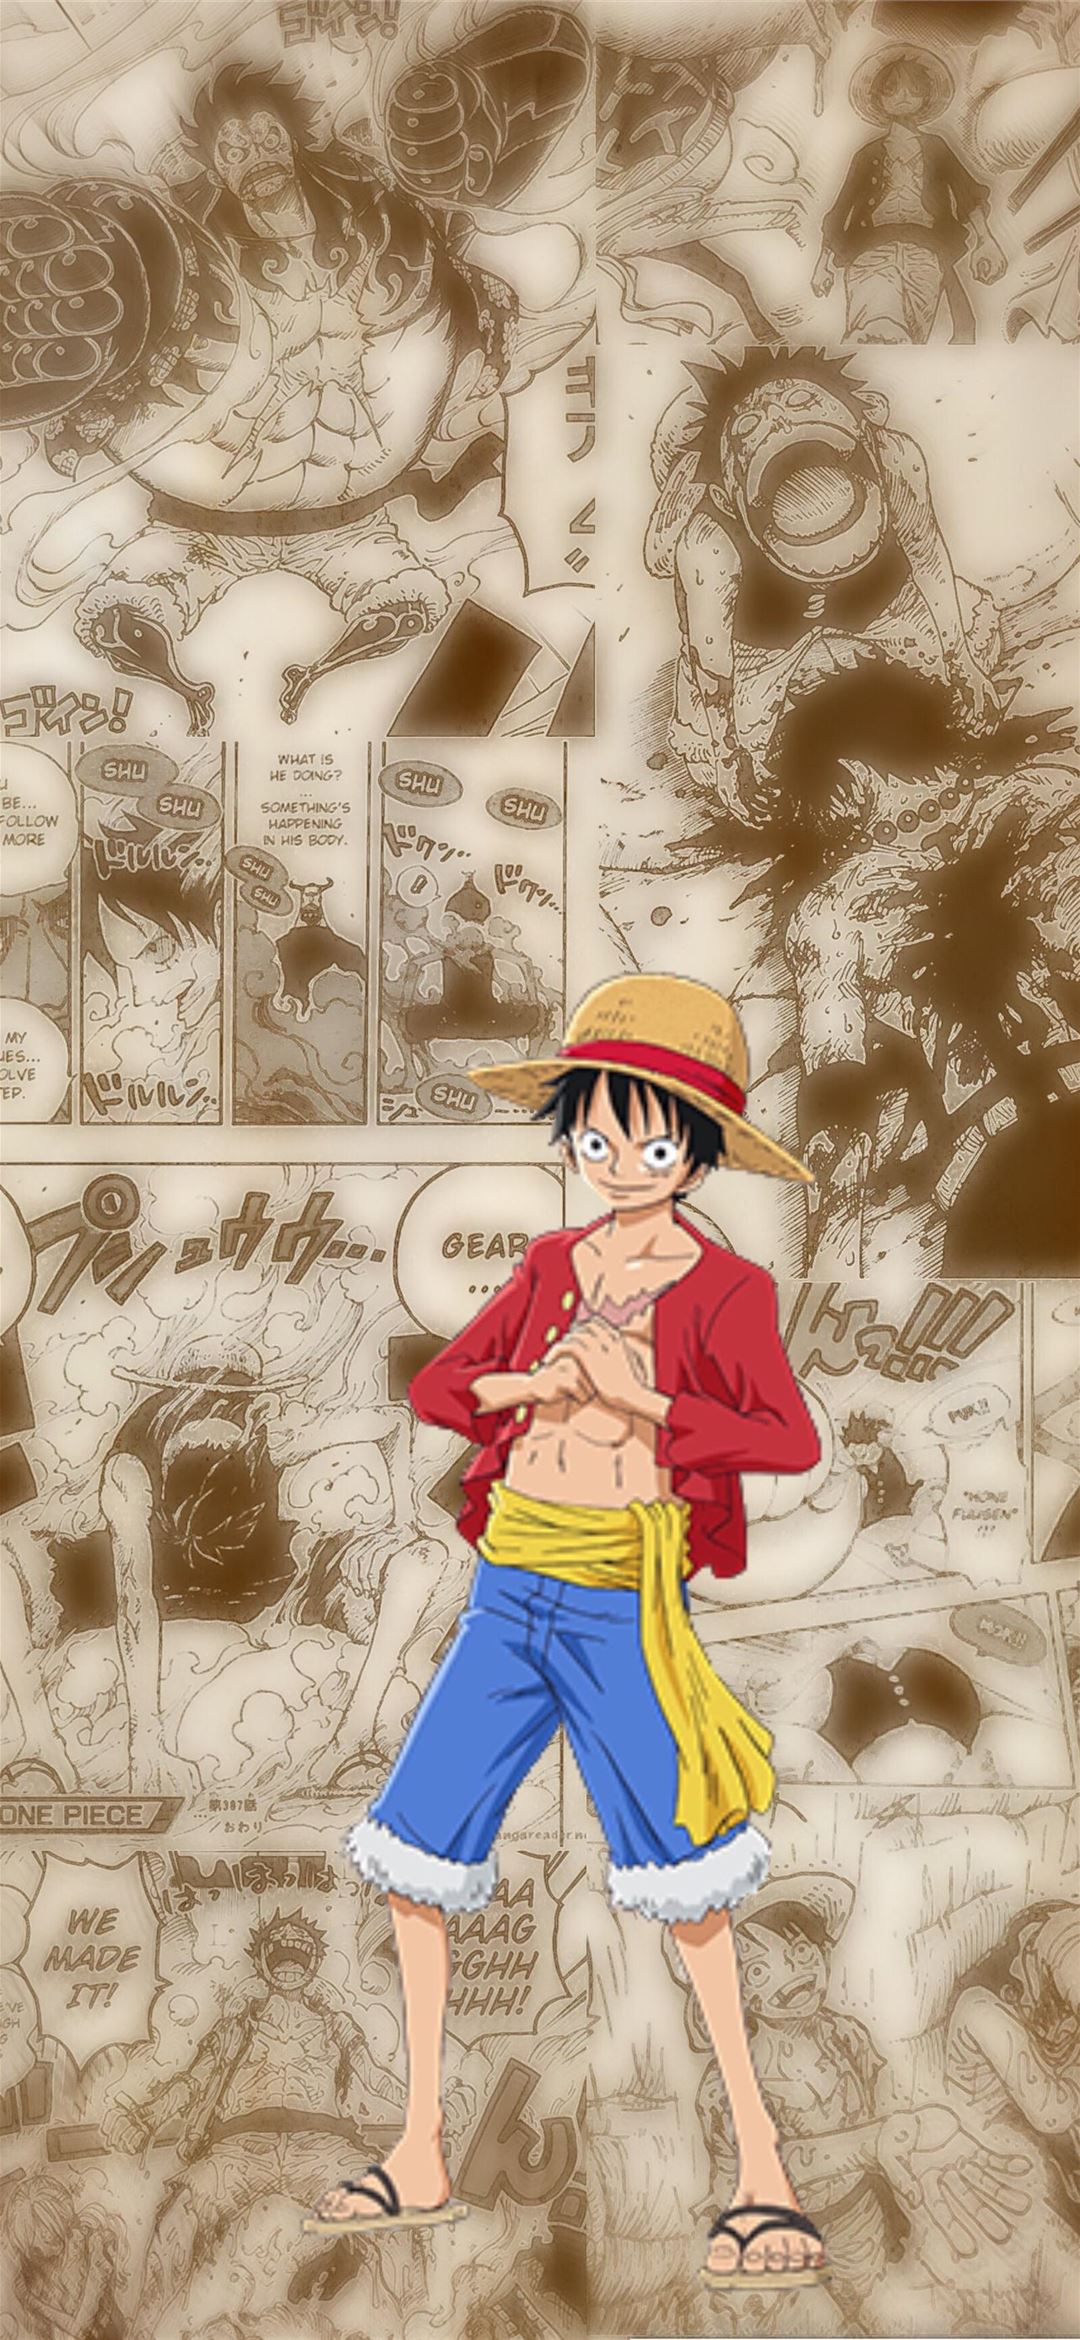 Download One Piece Sword Luffy Phone Wallpaper | Wallpapers.com